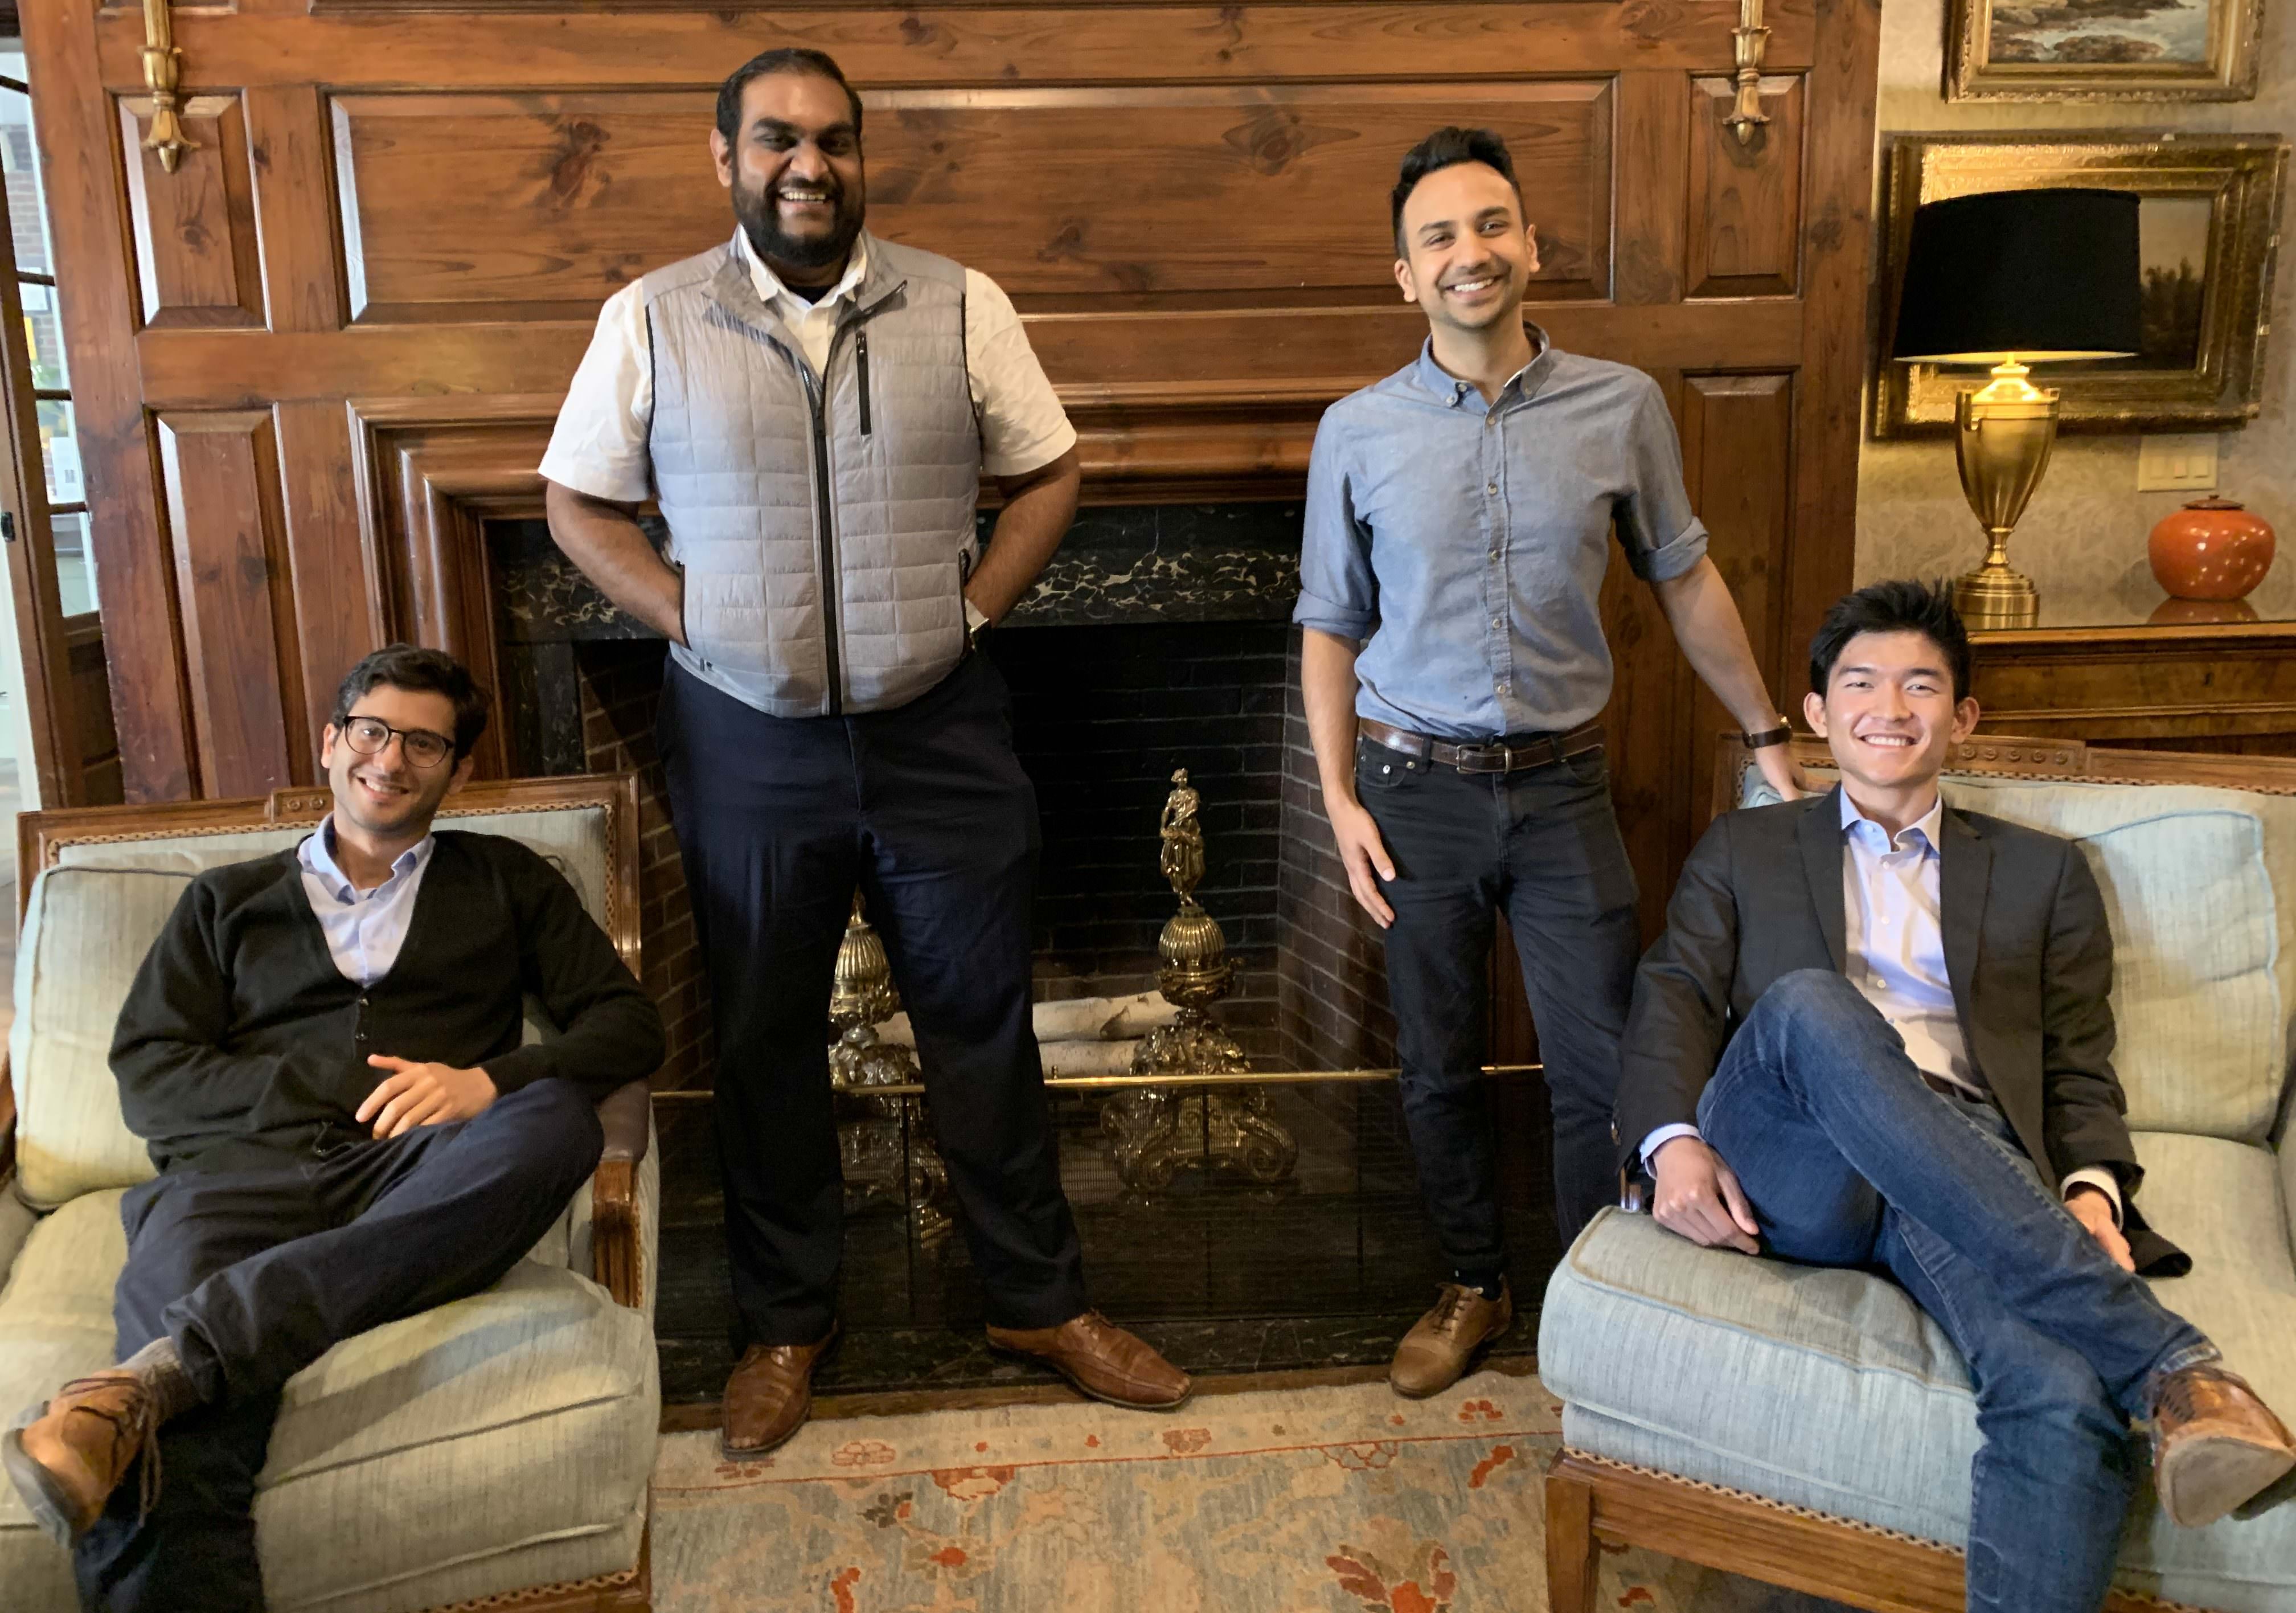 The four members of the Riskboard team wait for the decision at the Mittal Institute annual Seed for Change competition. From right to left: Ori Pleban, Arjun Bisen, Ryan Jiang, and Pradeepan Parthiban.